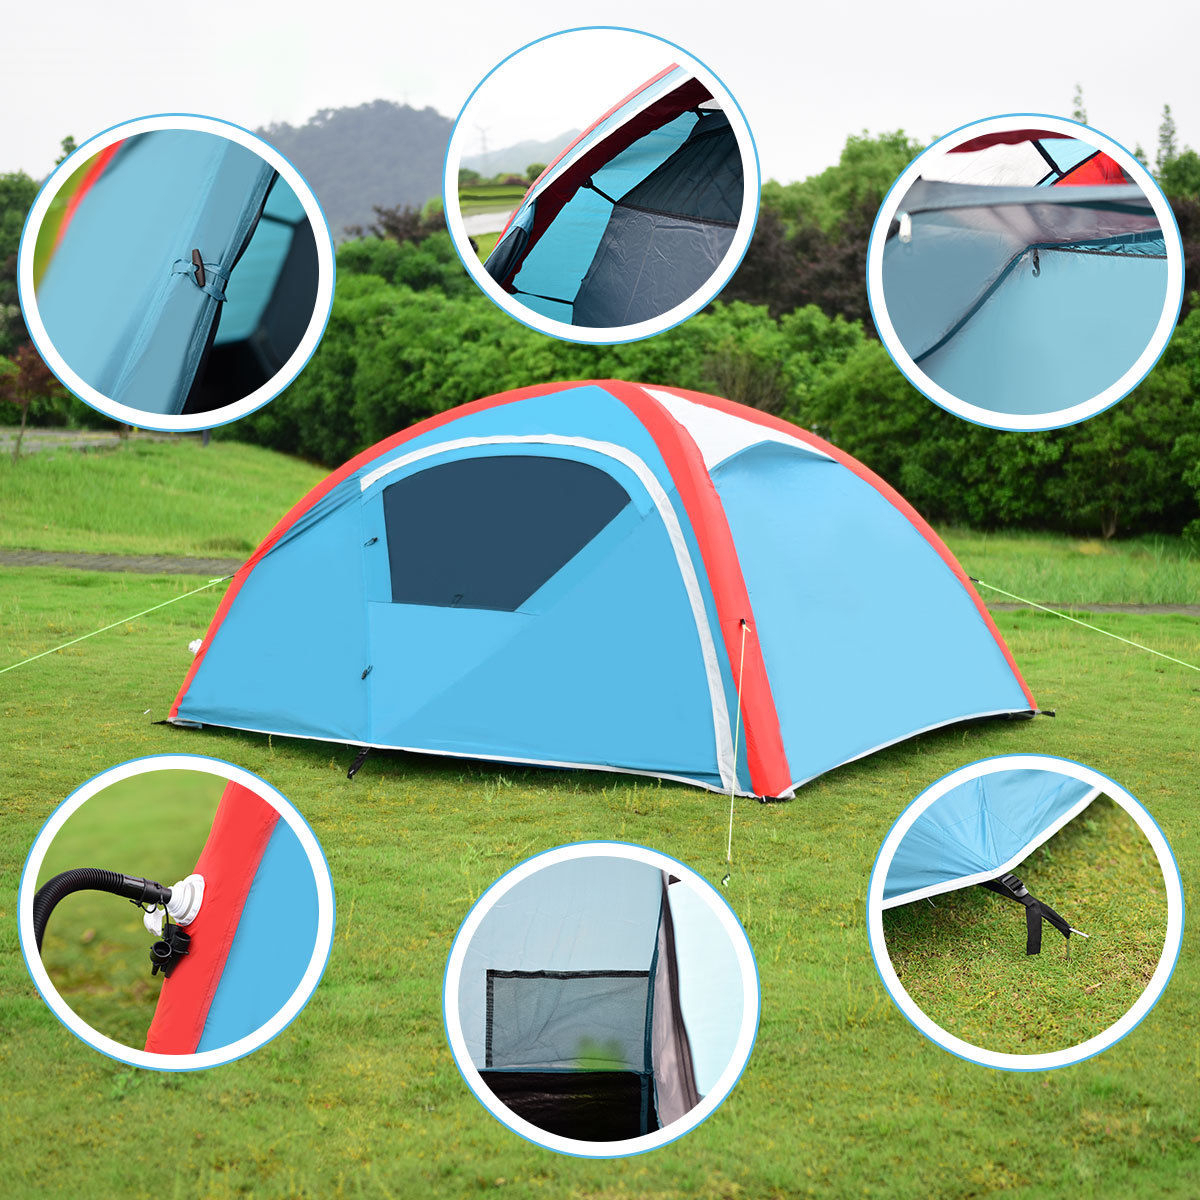 3 Person Inflatable Family Tent Camping Waterproof Wind Resistant W/ Bag Pump